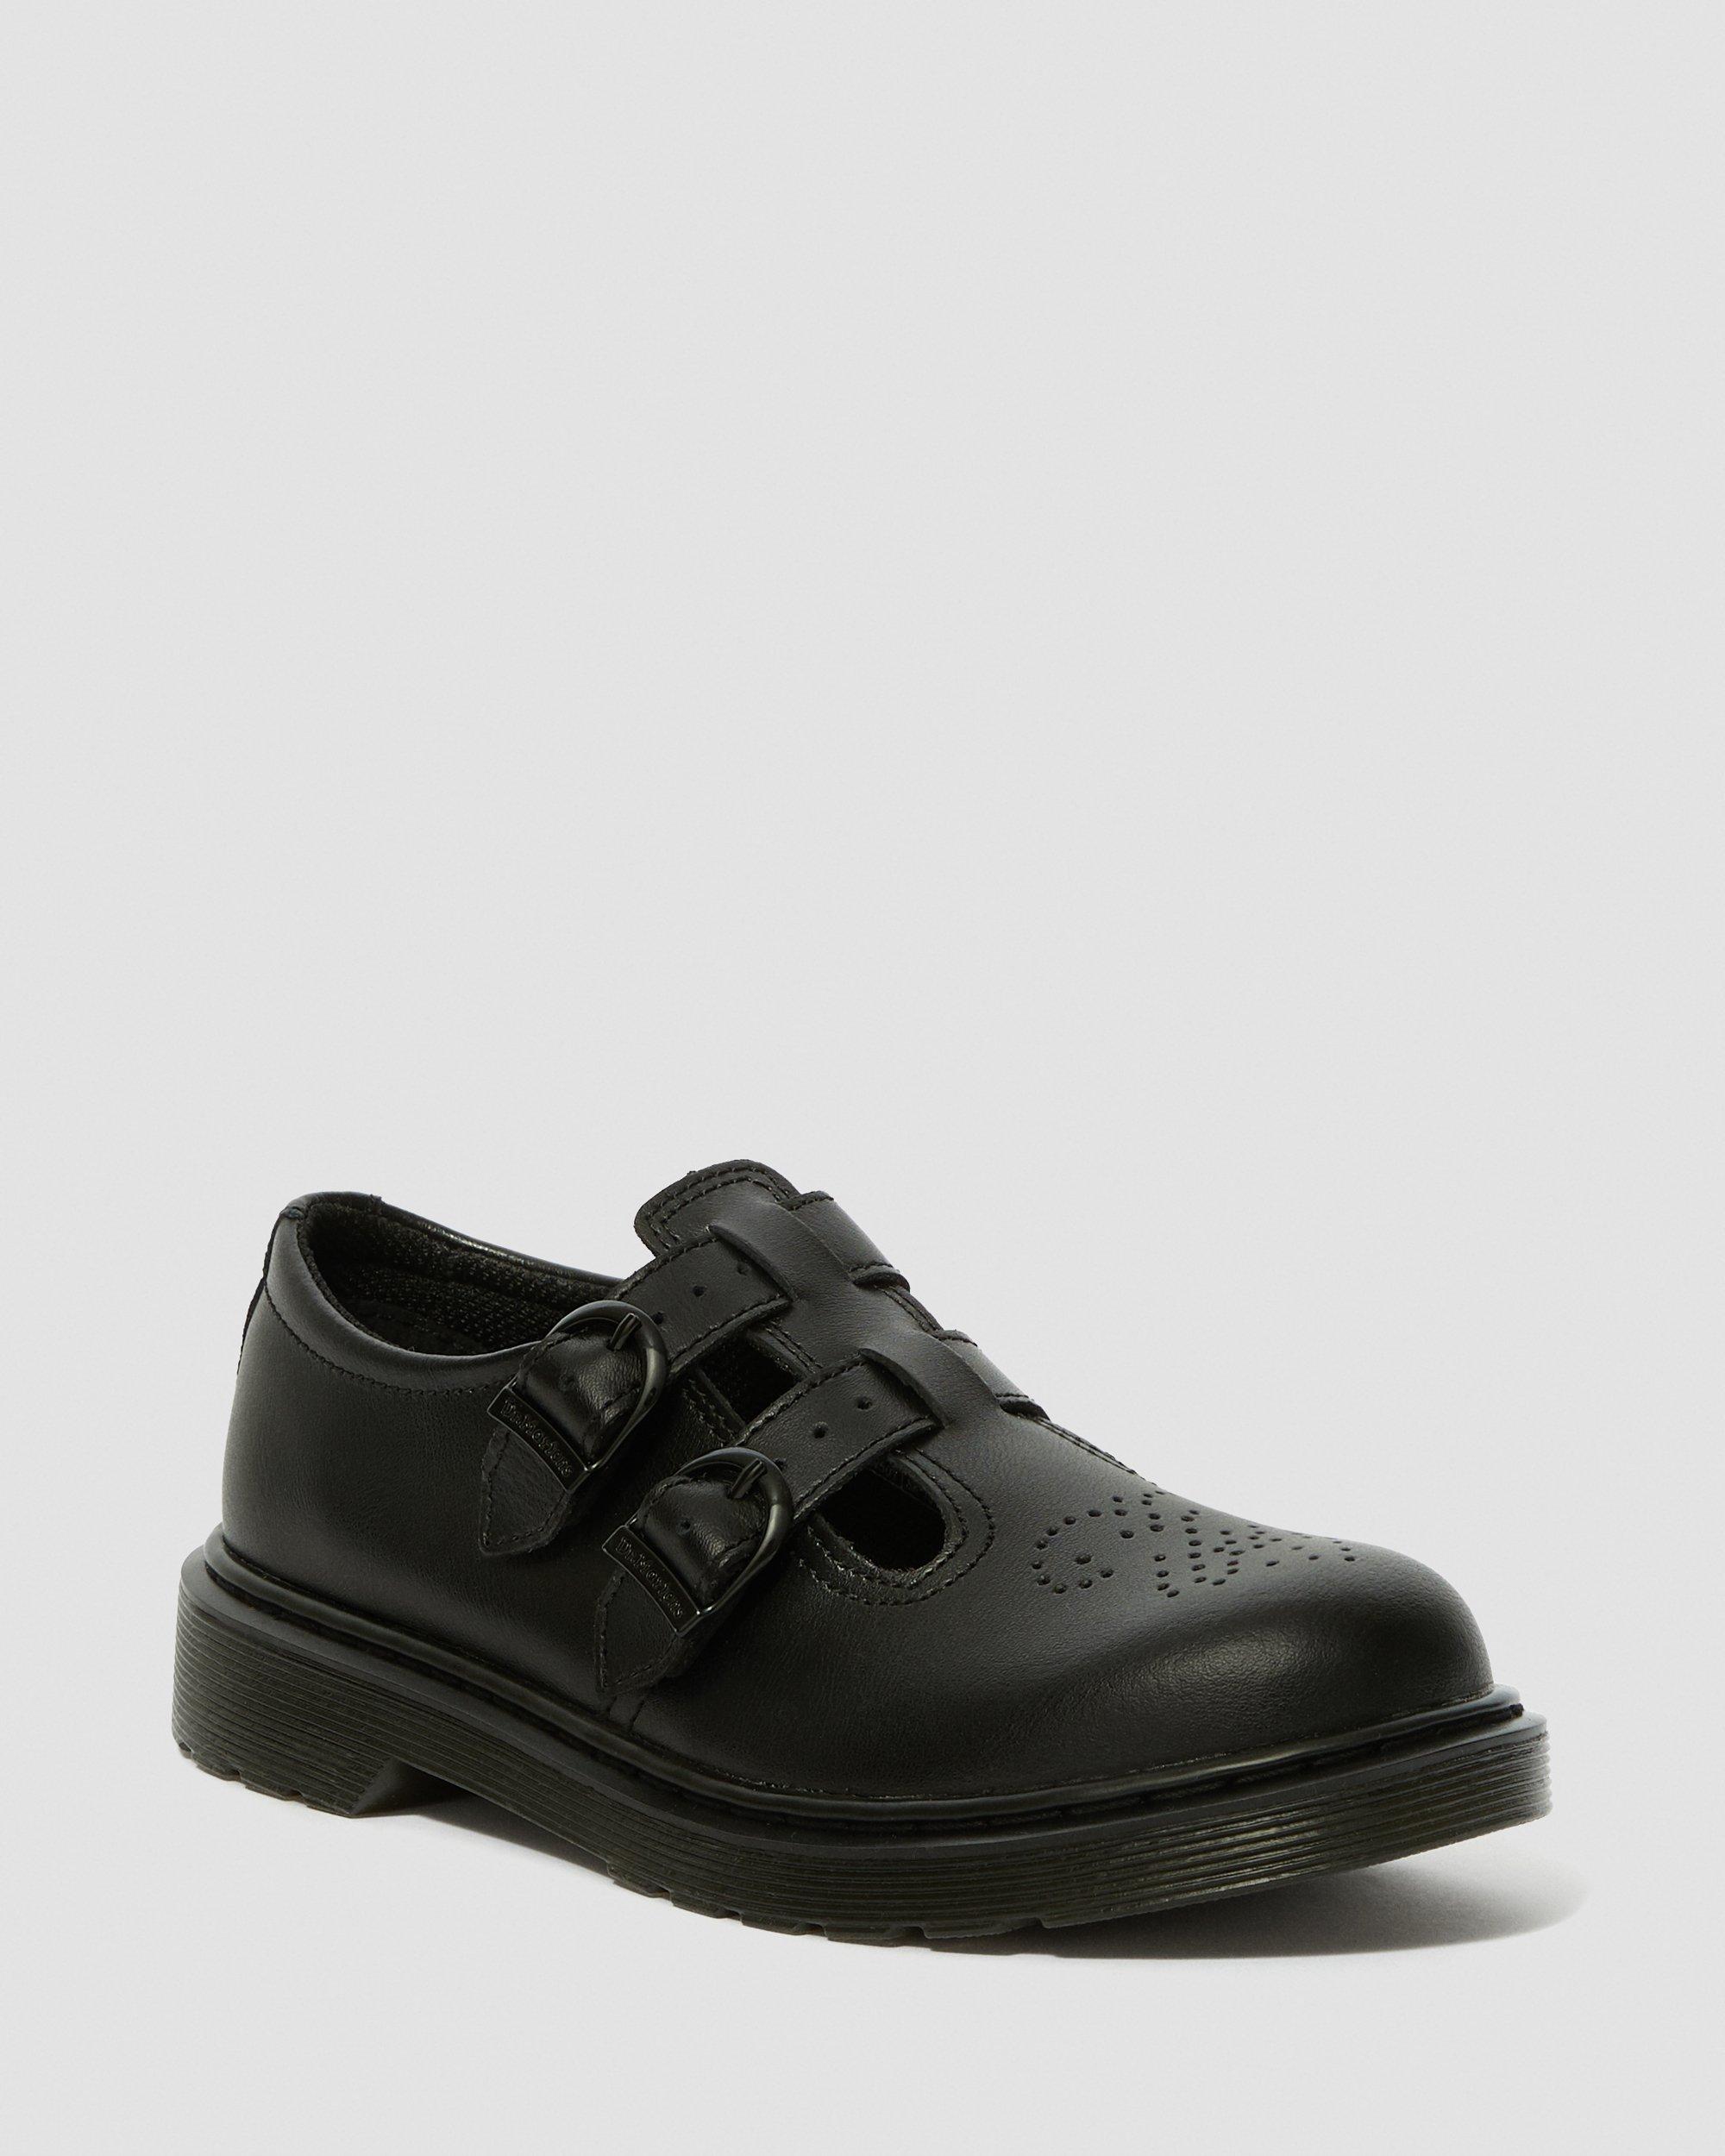 Youth 8065 Leather Mary Jane Shoes in Black | Dr. Martens